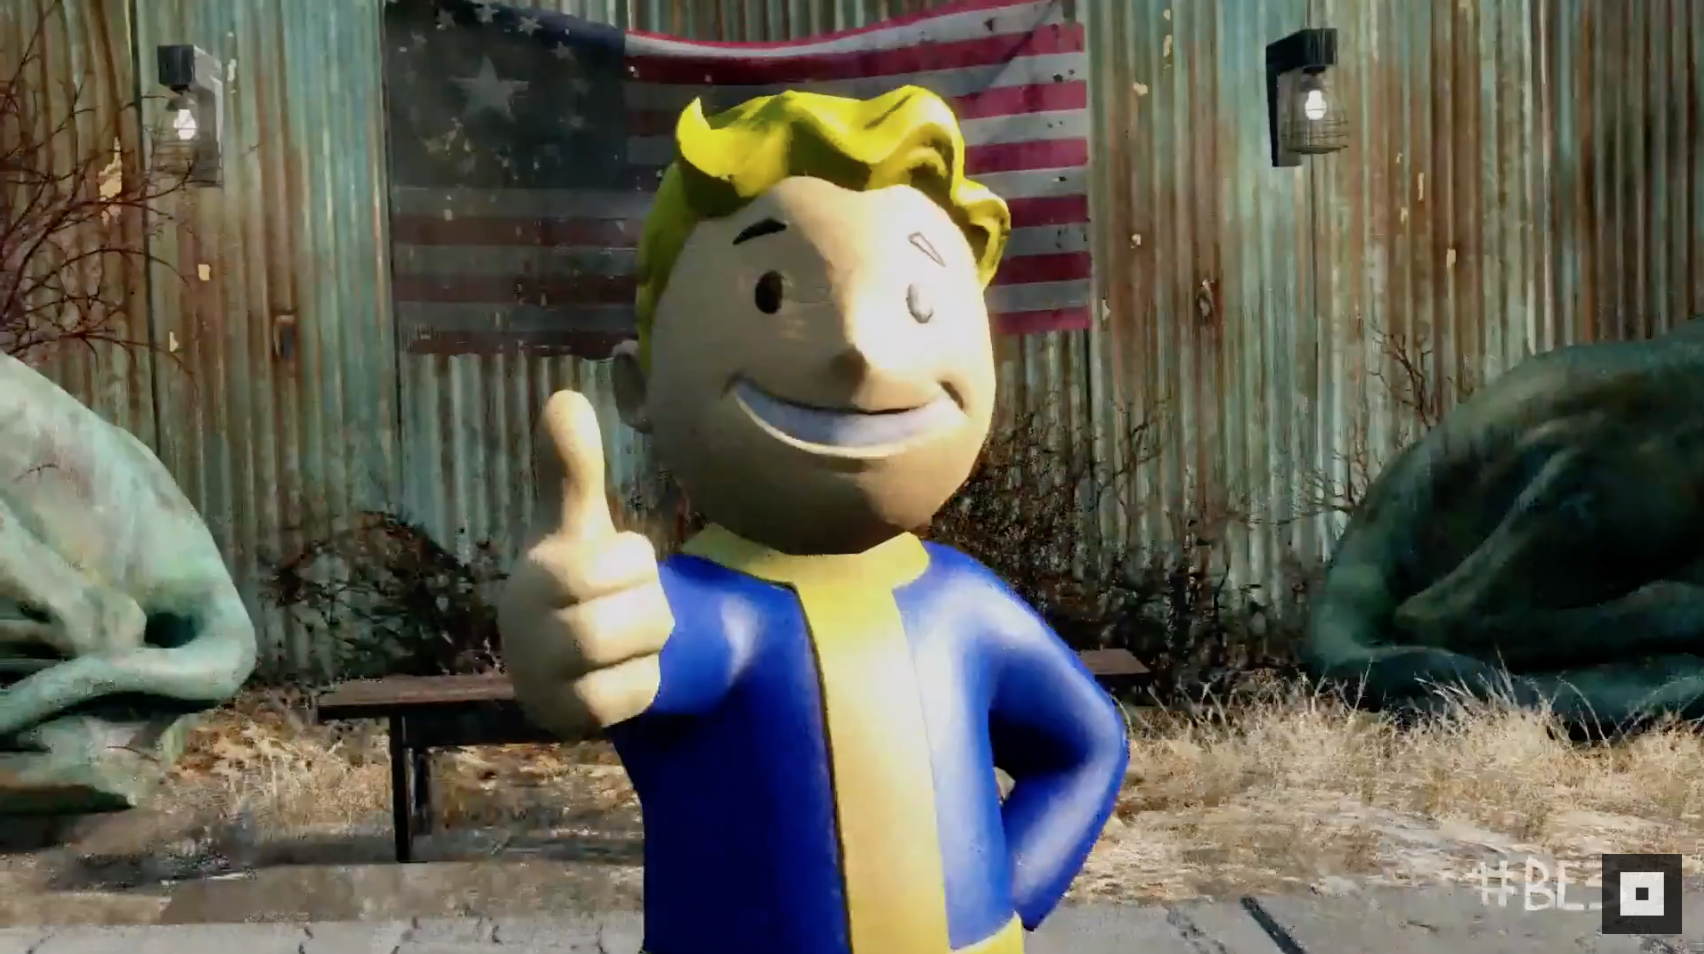 Bethesda's releasing two VR games, DOOM VFR and Fallout VR